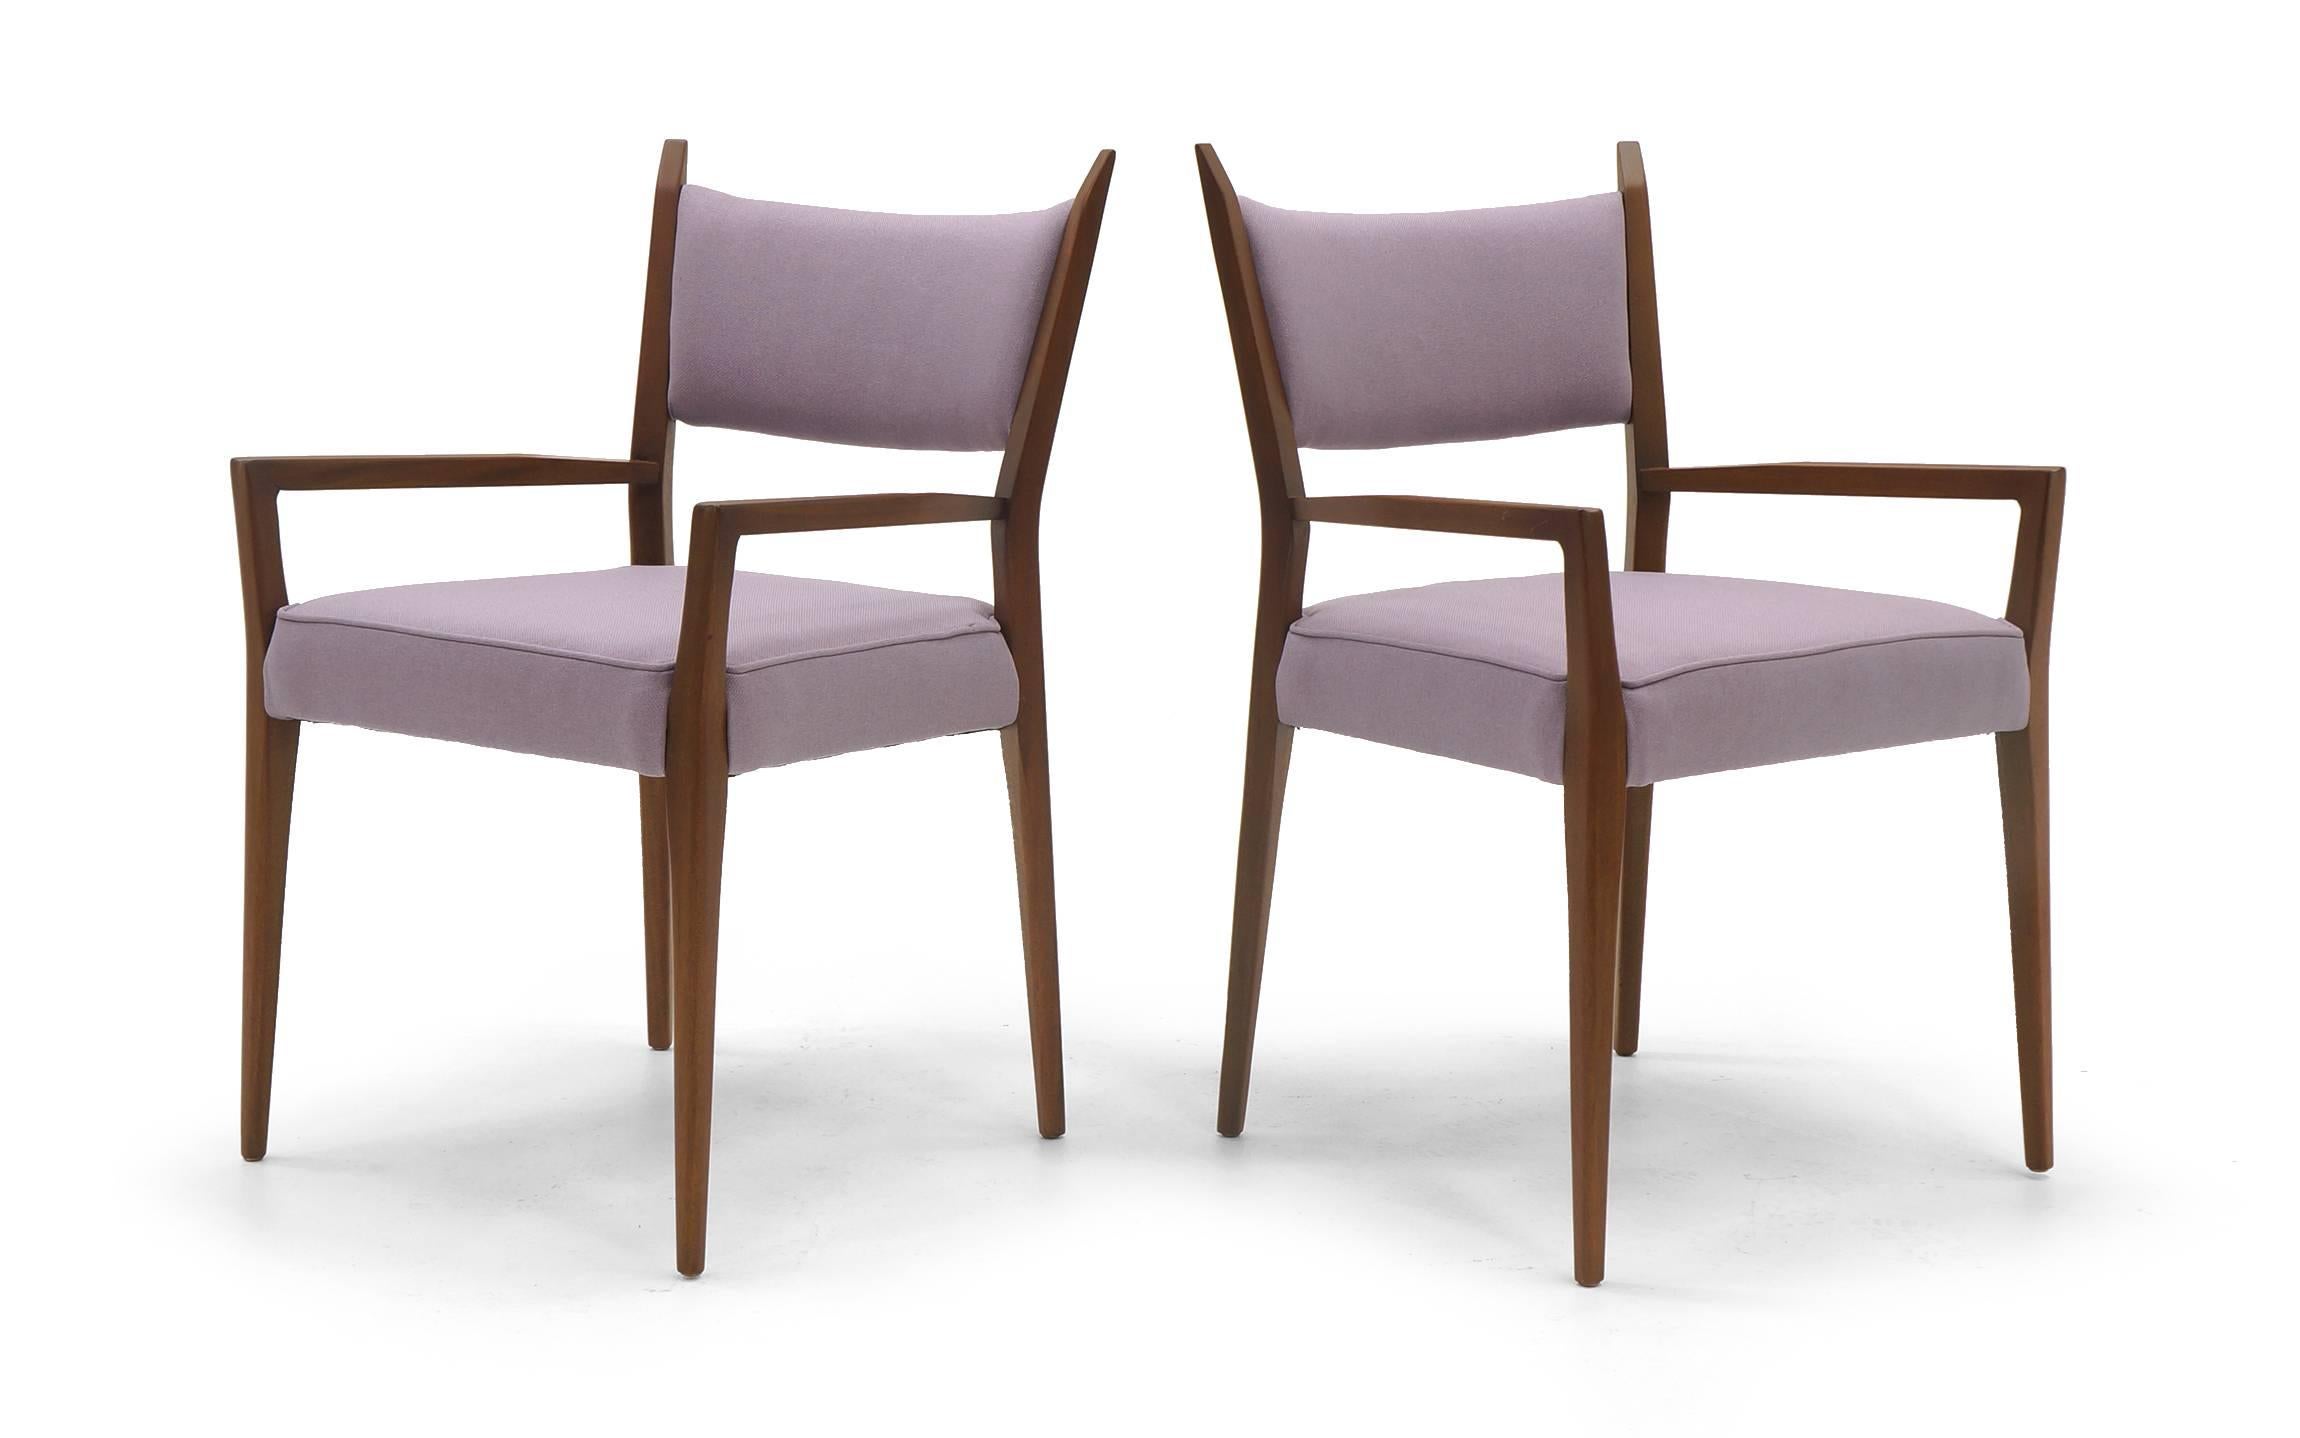 Set of Ten Dining Chairs by Paul McCobb for Calvin, New Lavender Upholstery 1